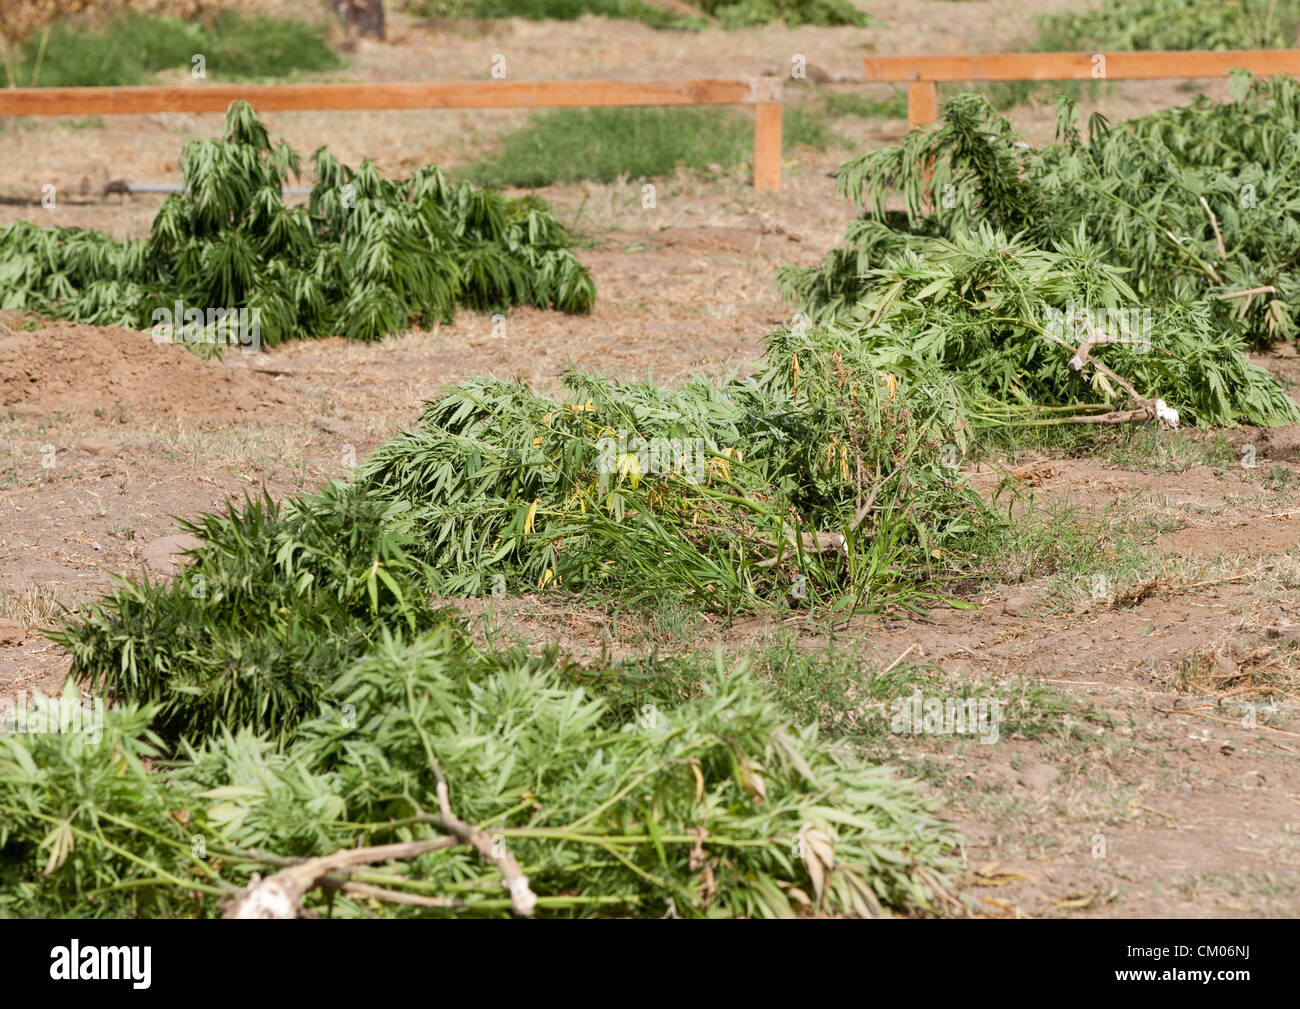 Sept. 6, 2012 - Modesto, CA, USA - Several hundred plants lay on the ground after MNet officers cut them down during a drug raid. Modesto Police Narcotic Enforcement Team(MNet) teamed up with the Crime Reduction Team Thursday Sept. 6th 2012 afternoon and busted a grow house in the 2100 block of Torrid Ave in west Modesto CA. A total of over 100 plants ranging in size along with several thousand dollars worth of already dried marijuana were found in the home, along with 3 weapons. (Credit Image: © Marty Bicek/ZUMAPRESS.com) Stock Photo